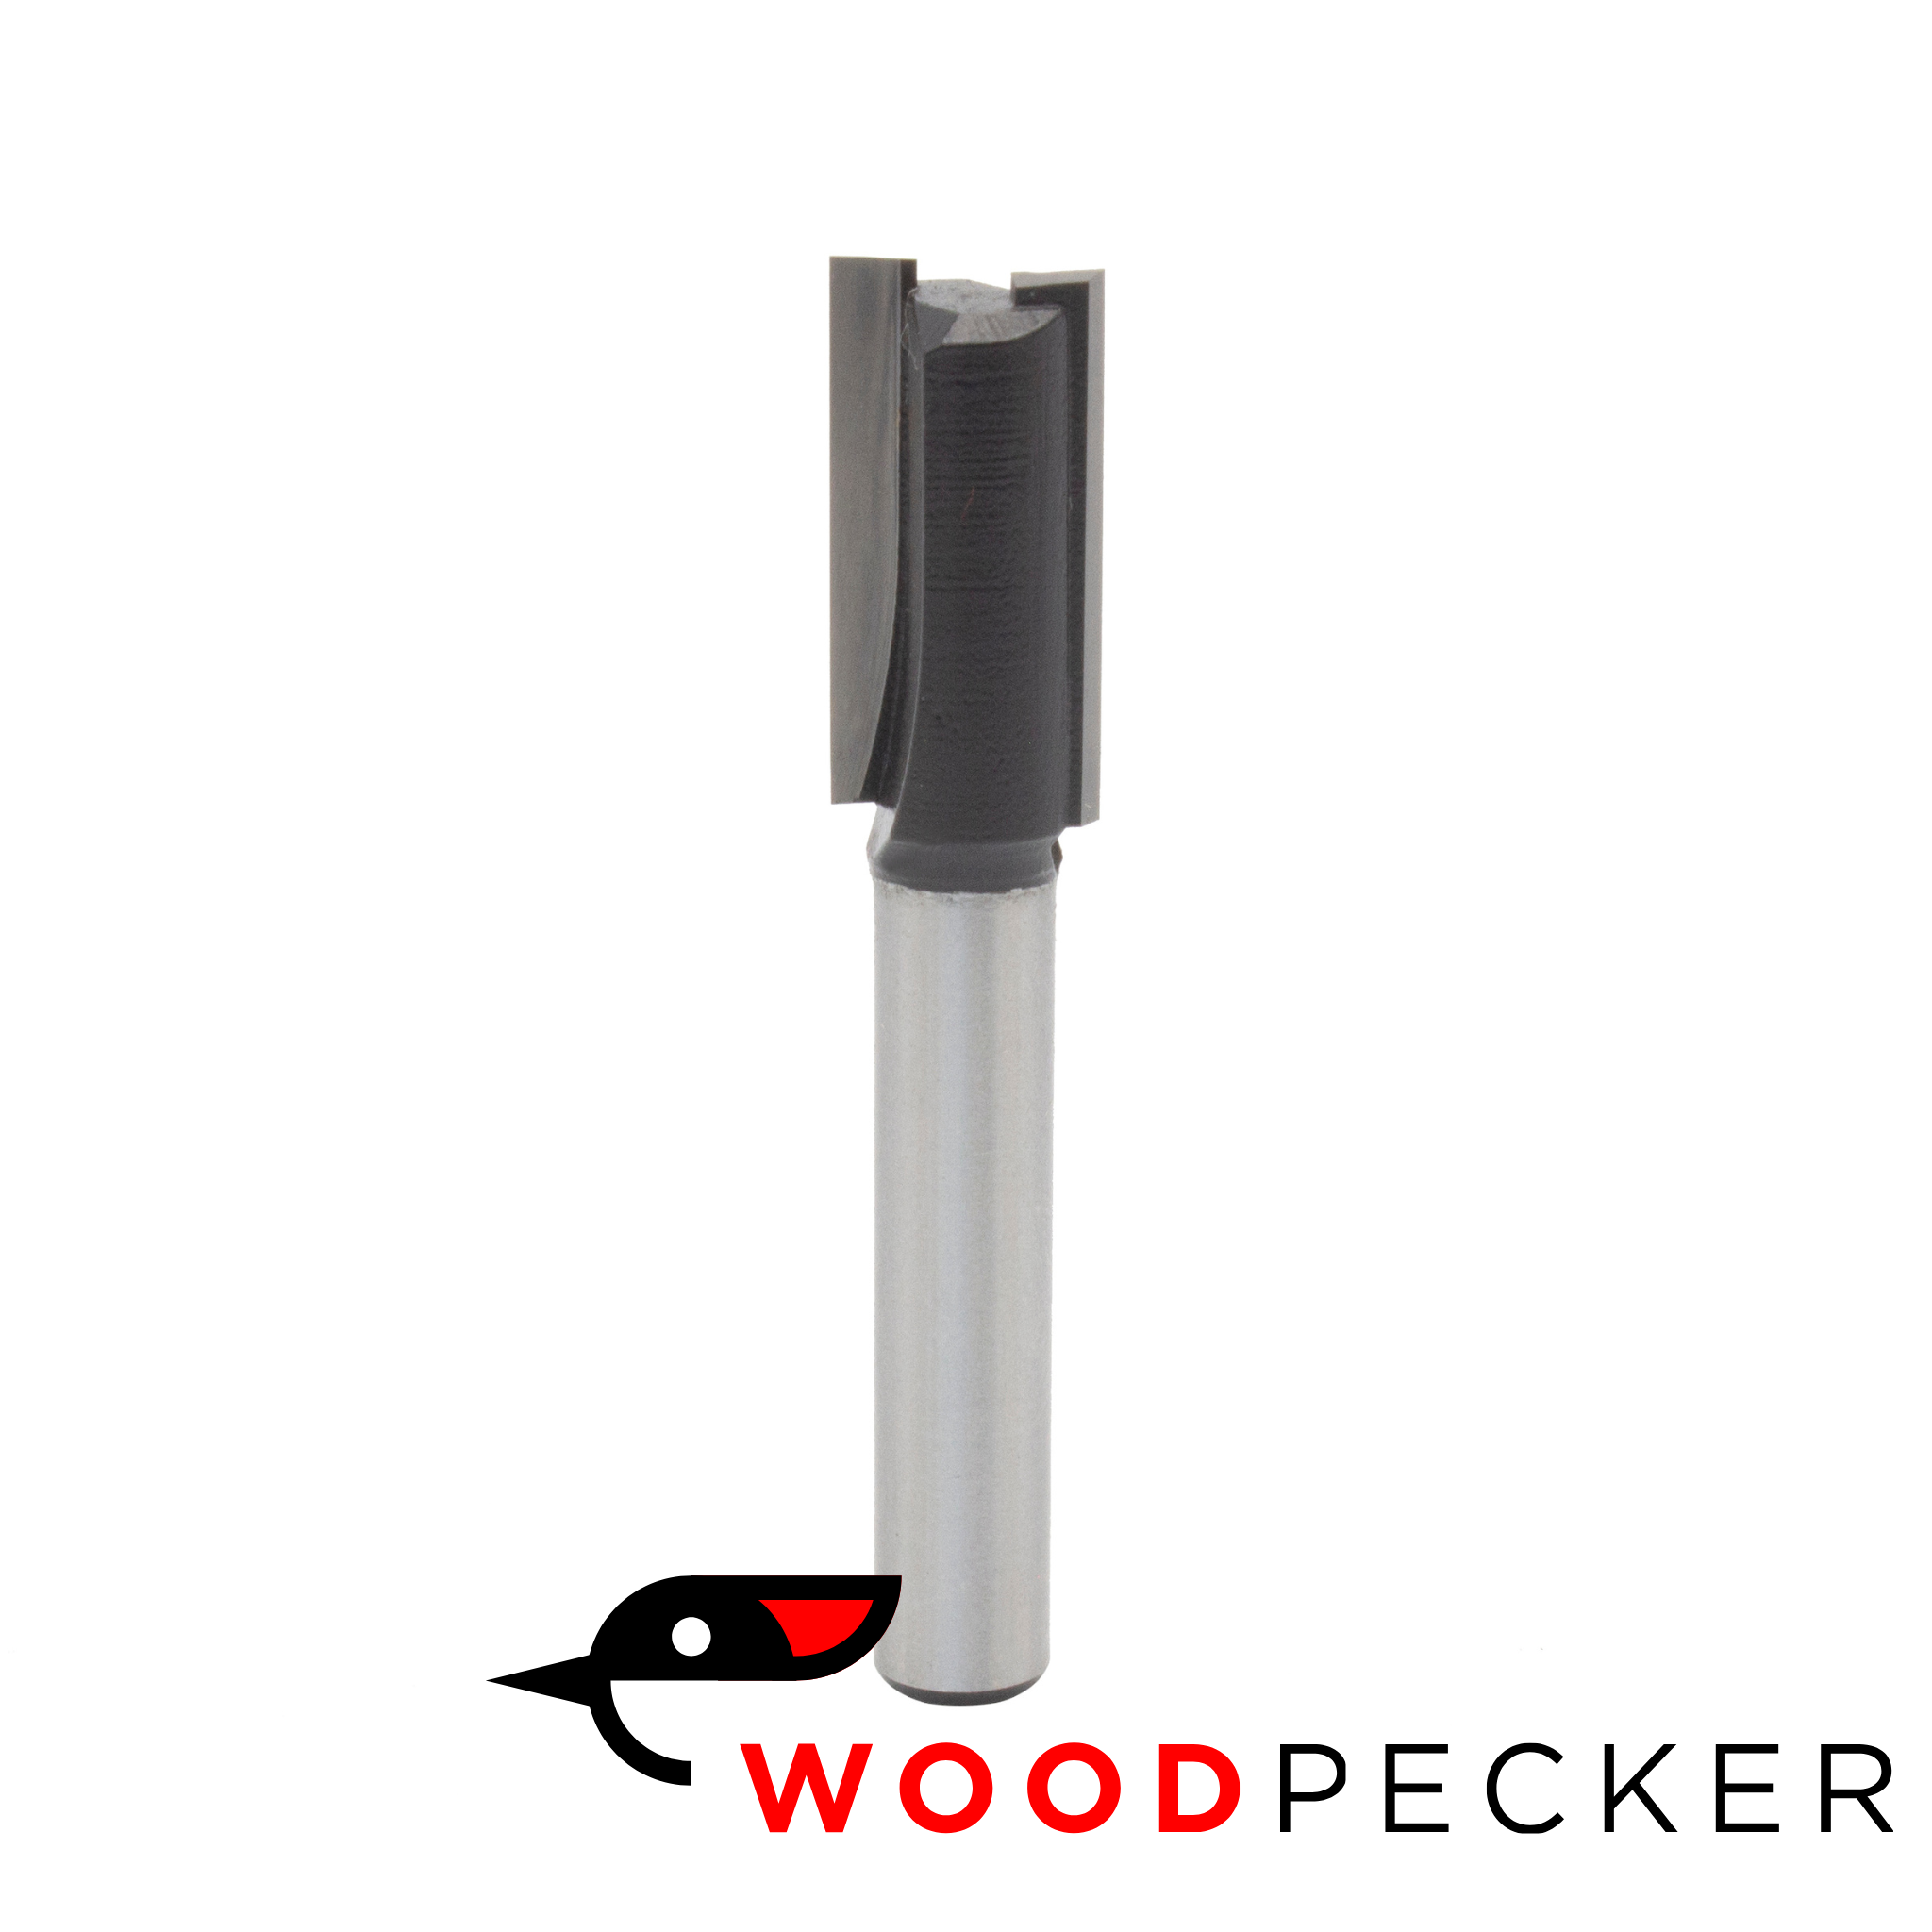 WoodPecker - Straight Bits 2 flutes - Shank 1/2" | Product